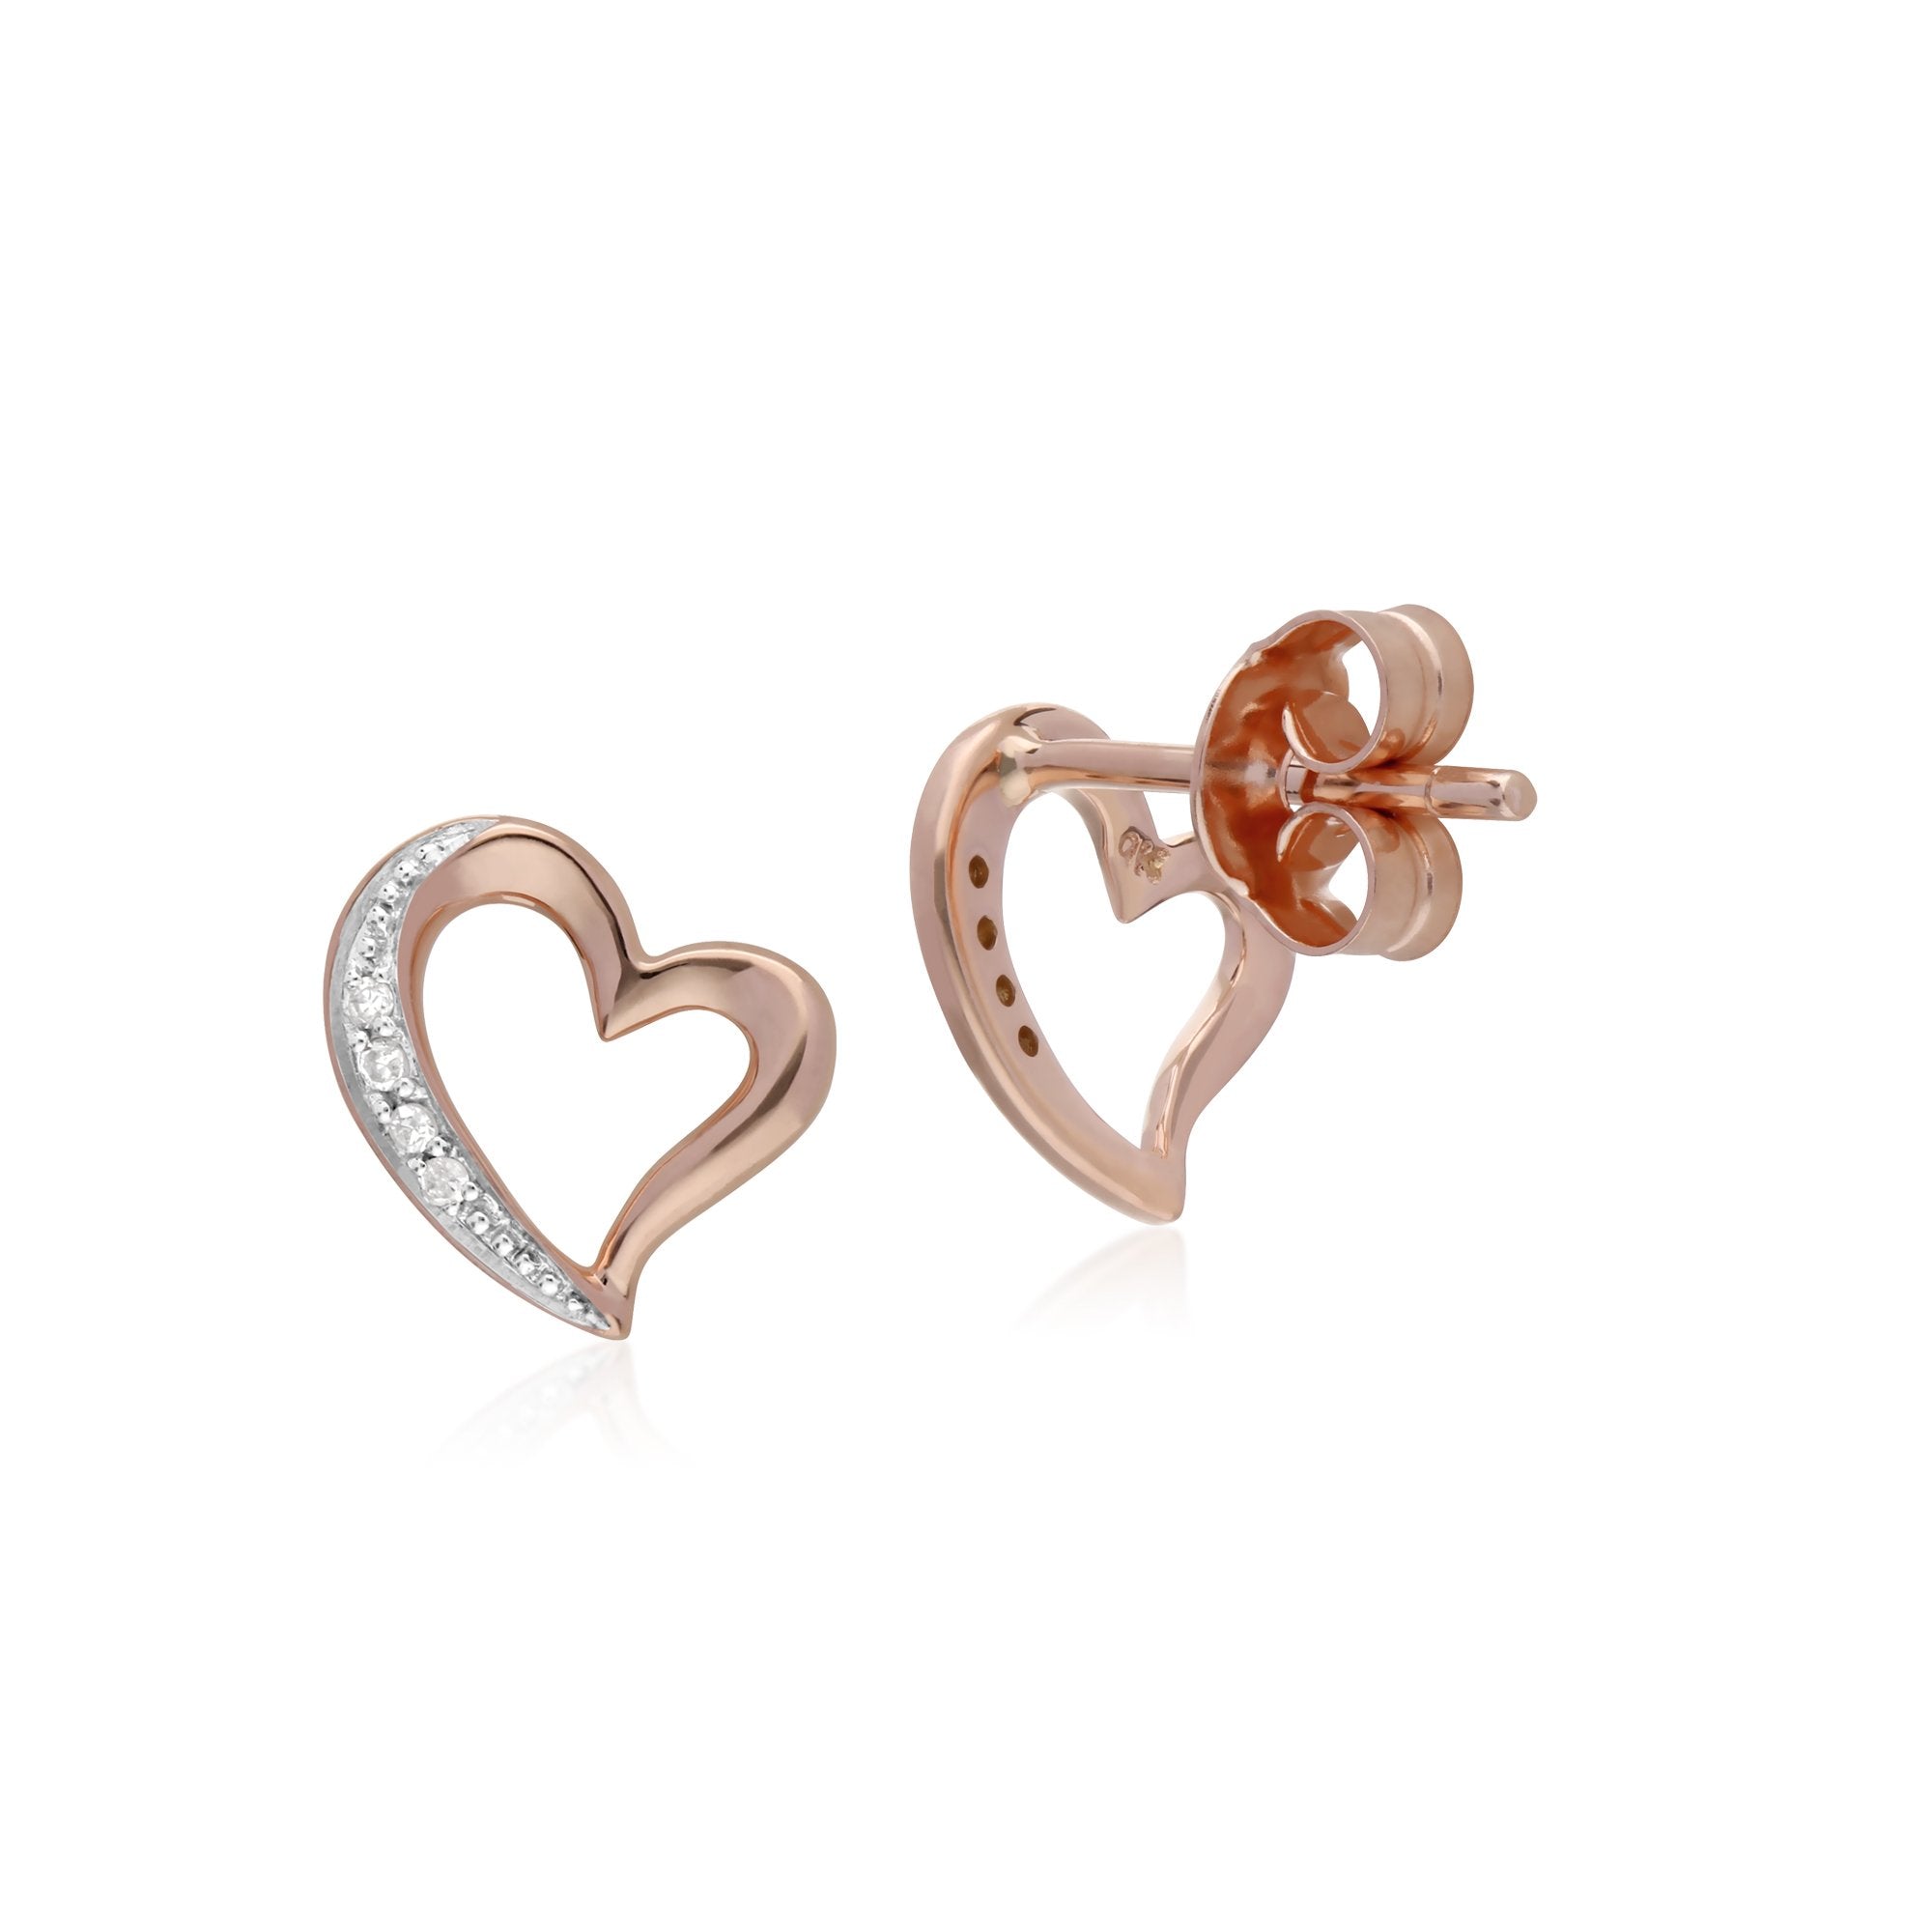 Classic Round Diamond Open Love Heart Stud Earrings in 9ct Rose Gold